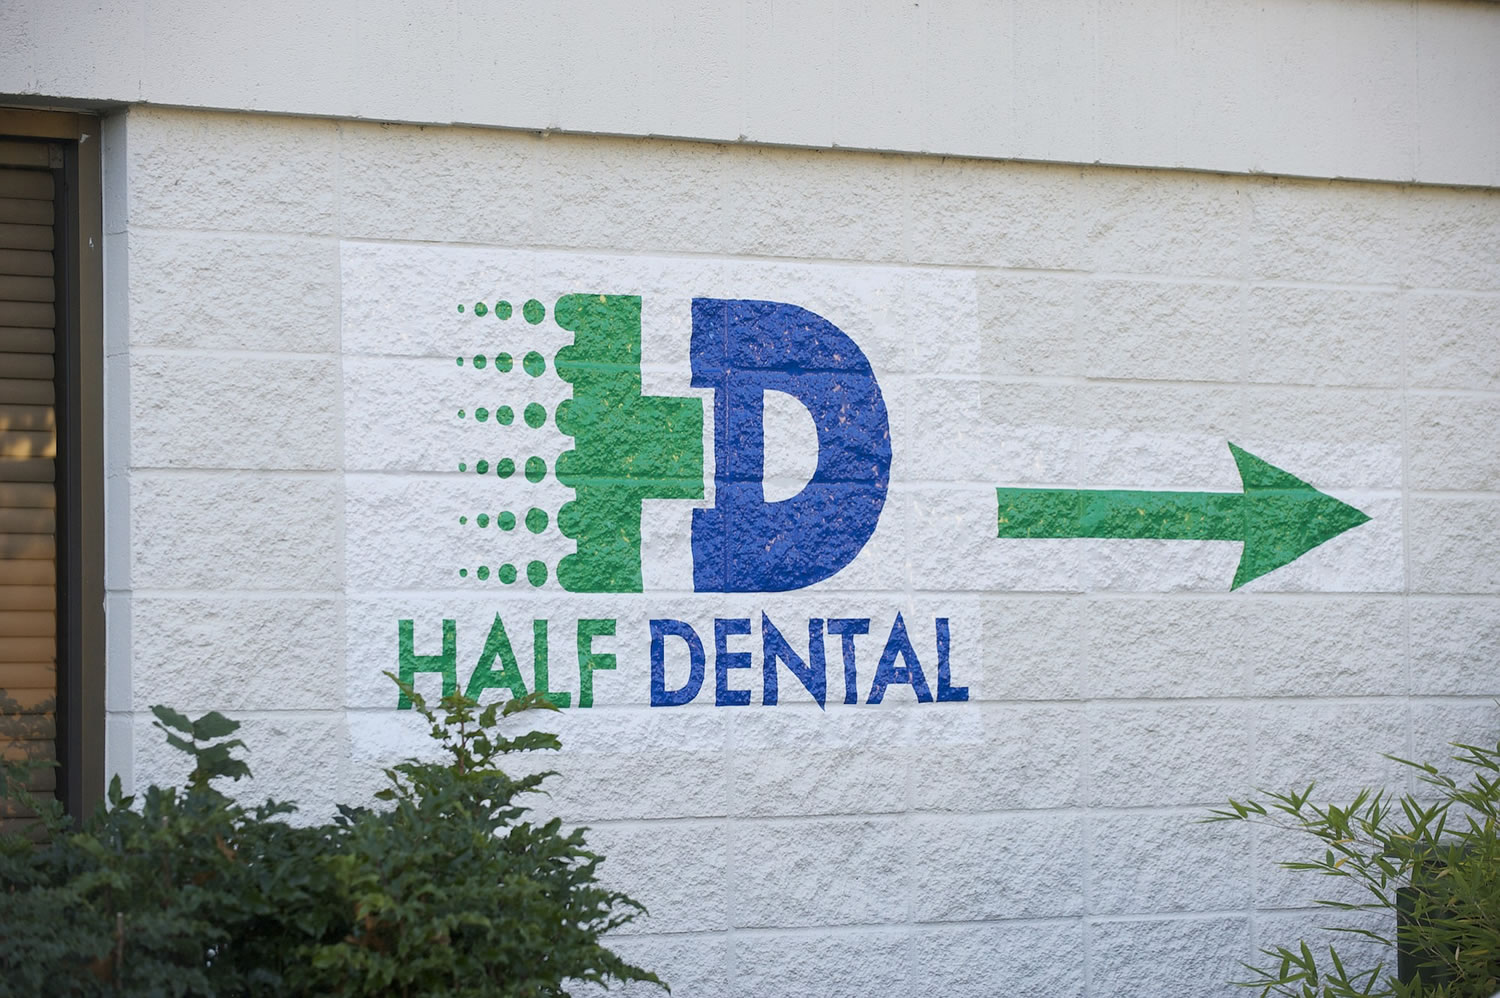 A patient of the now-closed Half Dental office filed a complaint Thursday with the Washington Attorney General's Office, claiming he has lost thousands of dollars he paid for unfinished dental work.